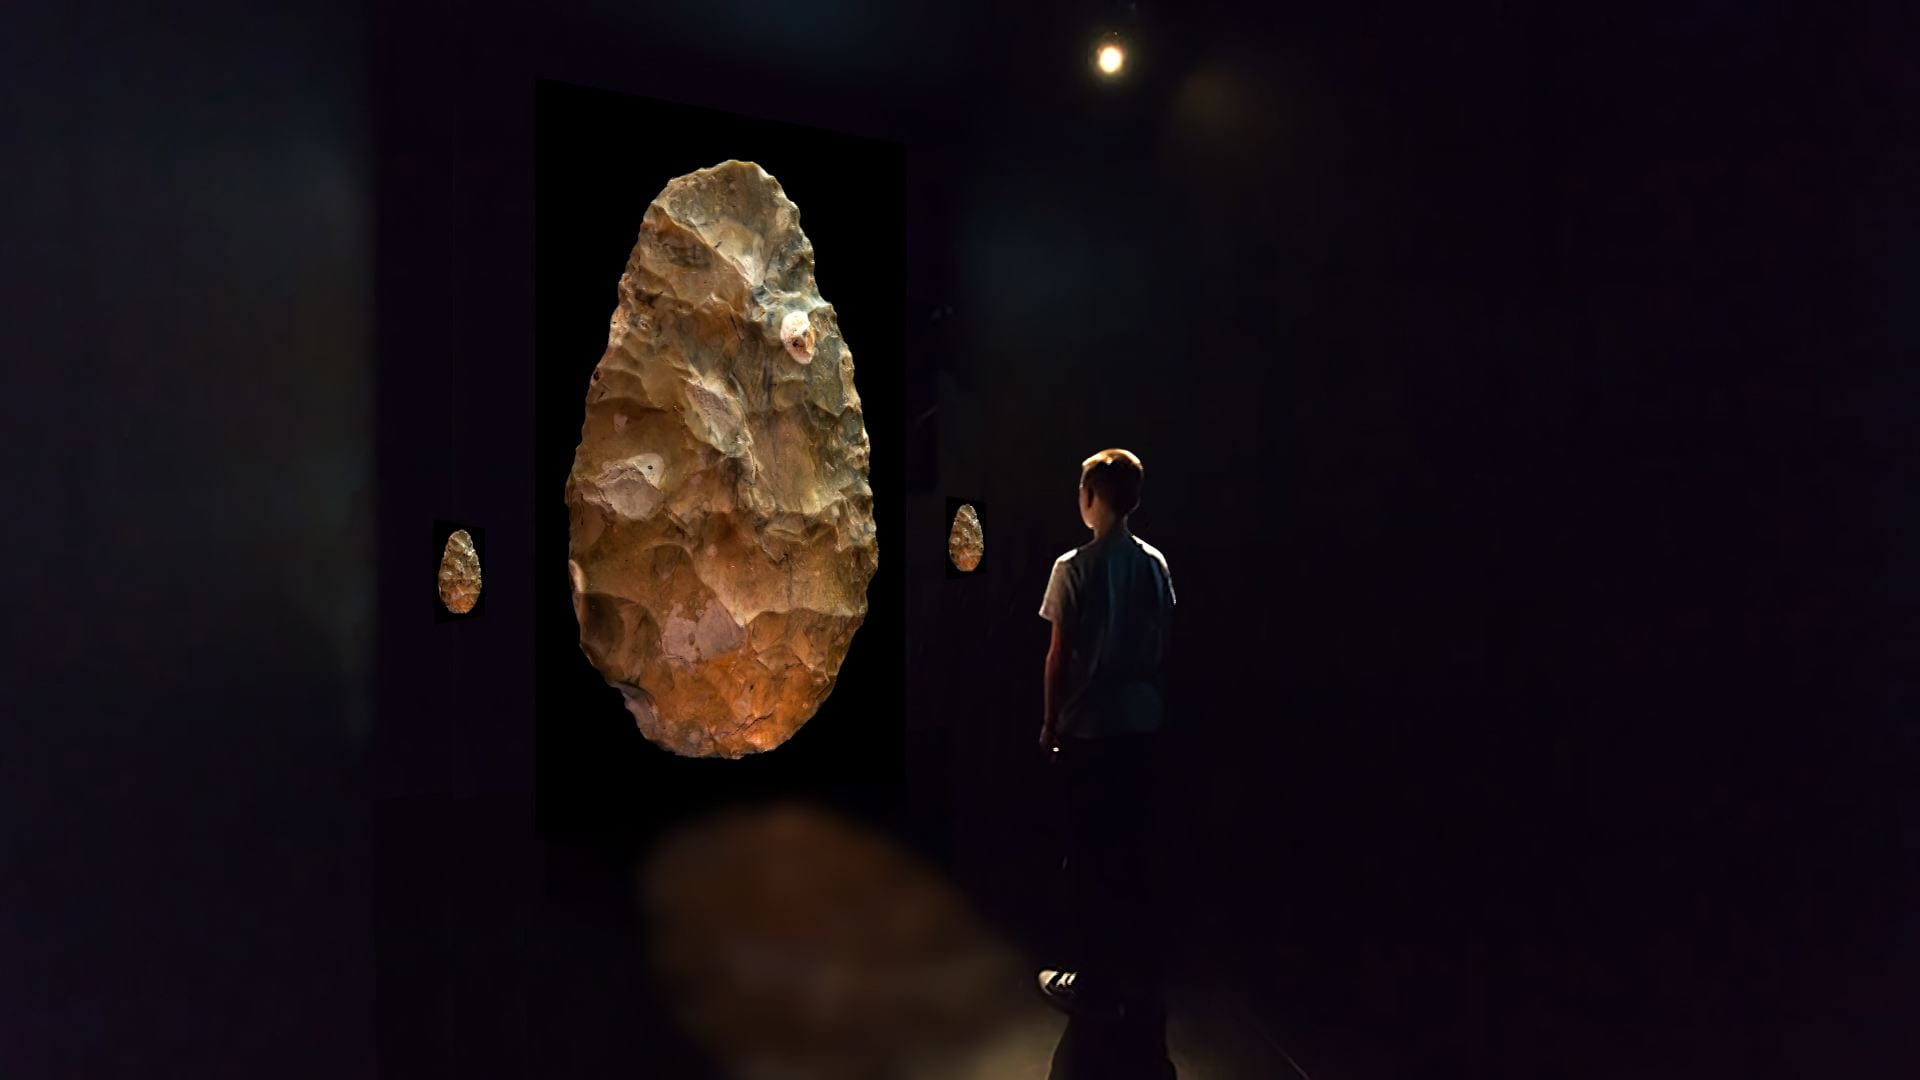 Publicity image for the exhibition "Paleolithic Points from The Forms: Four Worlds | David Lebrun" showing a young boy standing in front of a larger-than-life projected image of an ancient artifact made of stone.